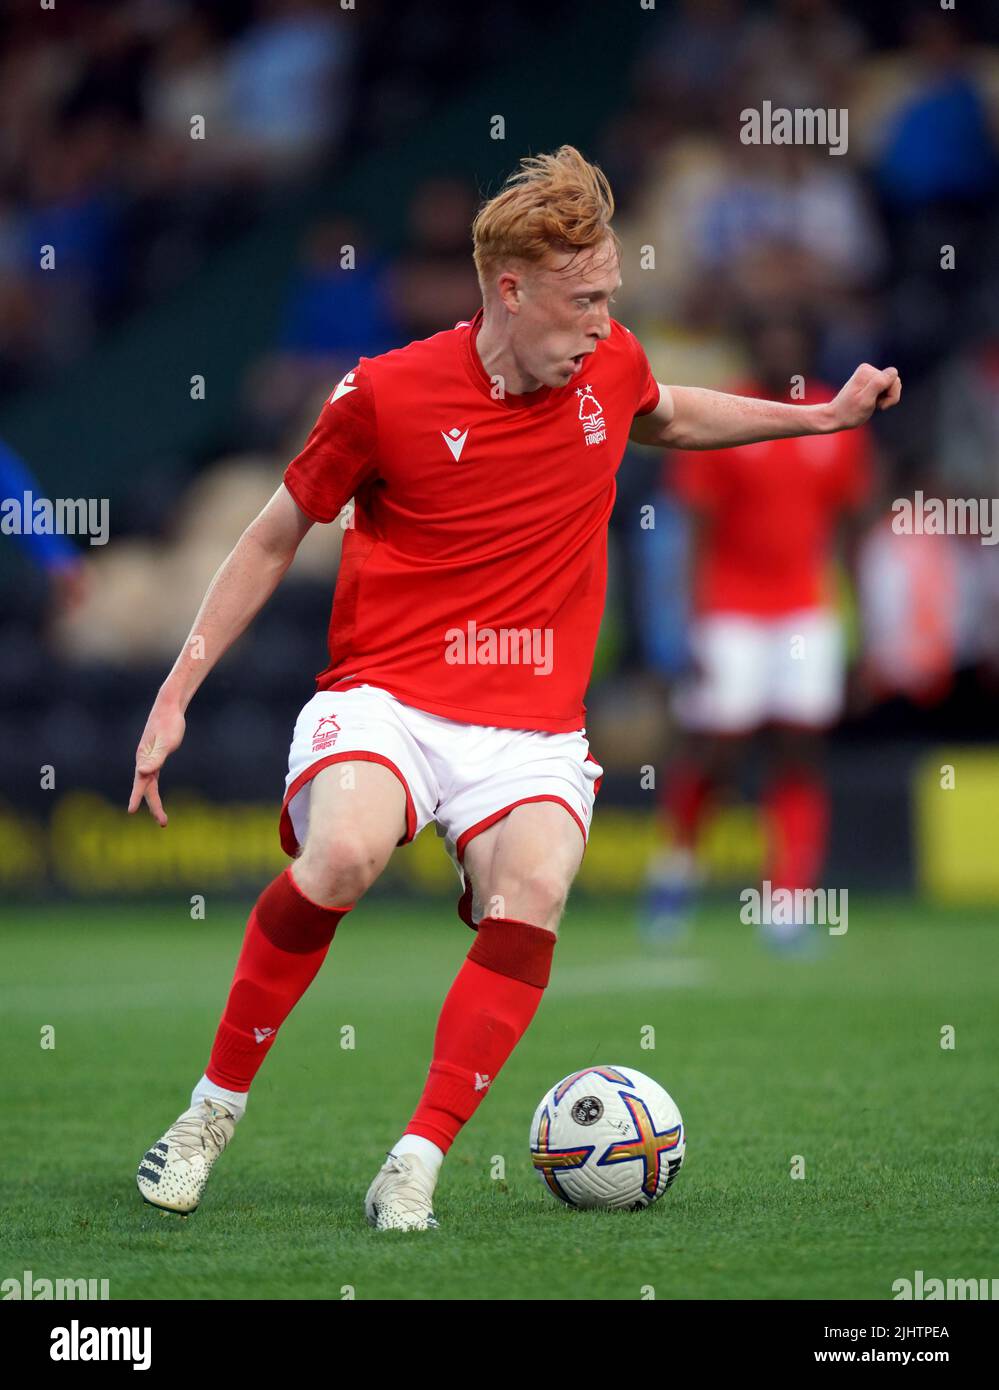 Nottingham Forest's Oli Hammond during a pre-season friendly match at the Pirelli Stadium, Burton upon Trent. Picture date: Wednesday July 20, 2022. Stock Photo